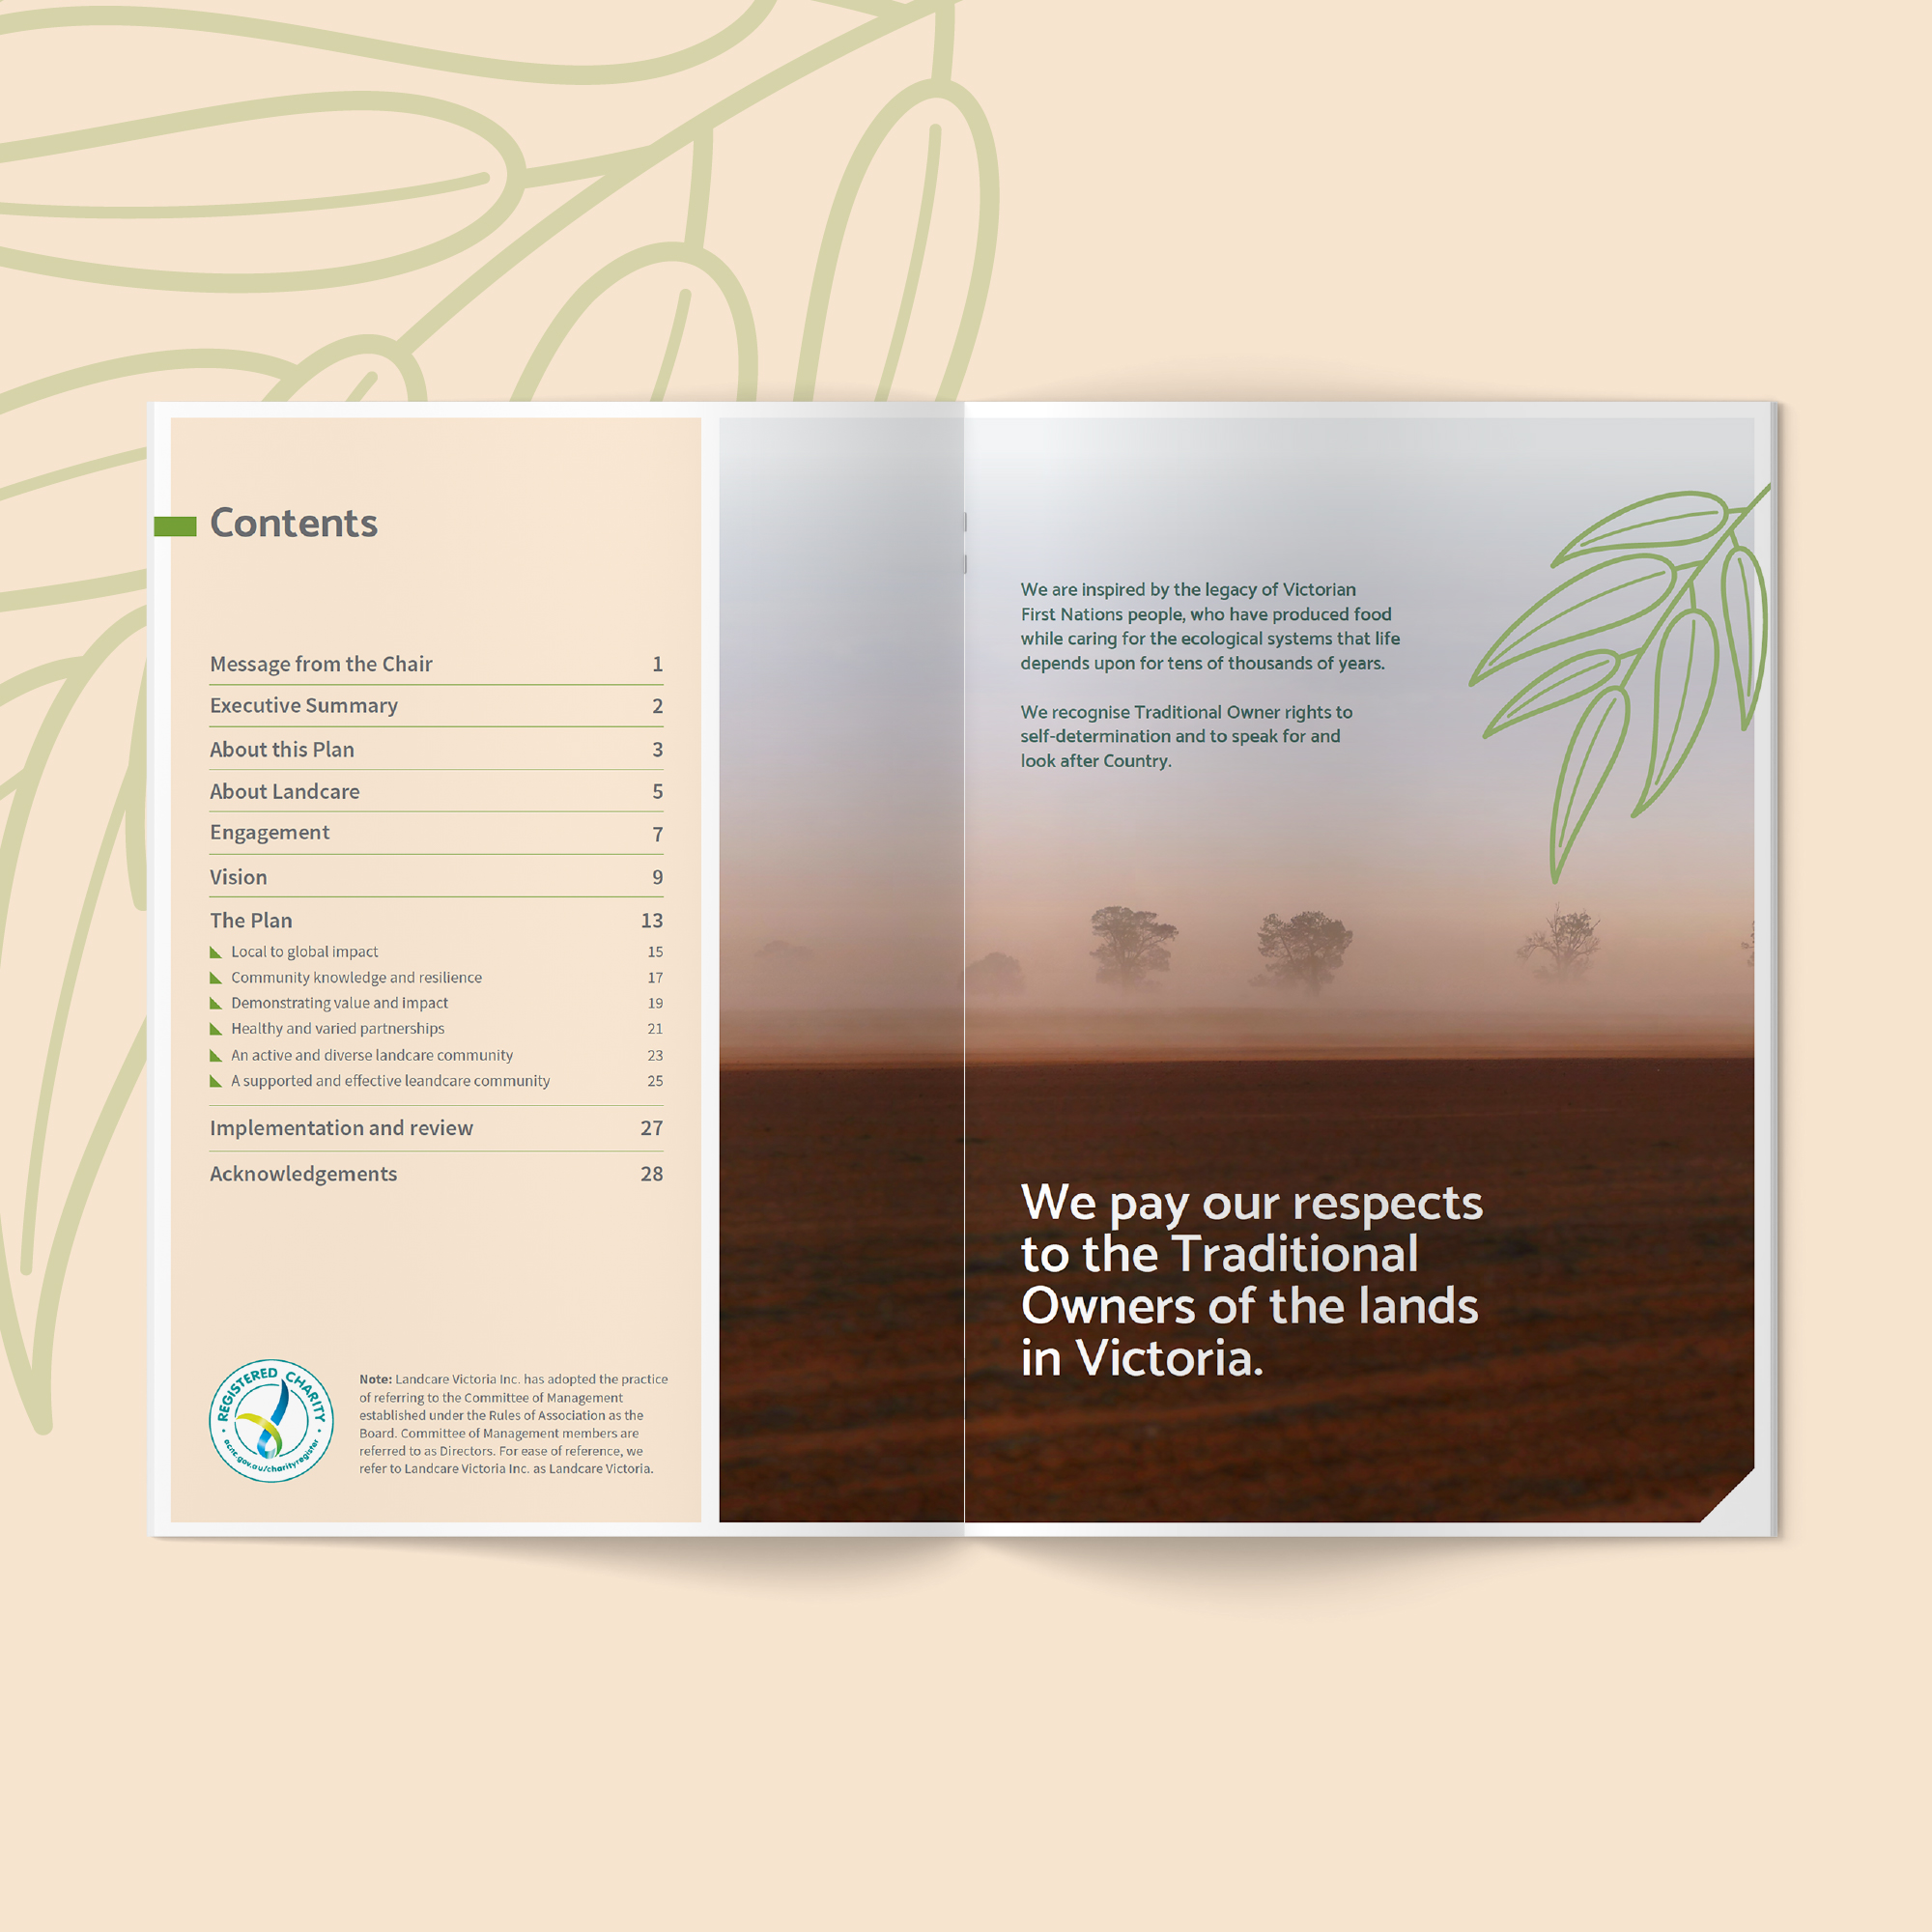 Full colour mockup of the Landcare Plan for Victoria 2023-2033 'Contents' spread on a beige background with a gum leaf pattern. Spread features the contents of the Plan document.